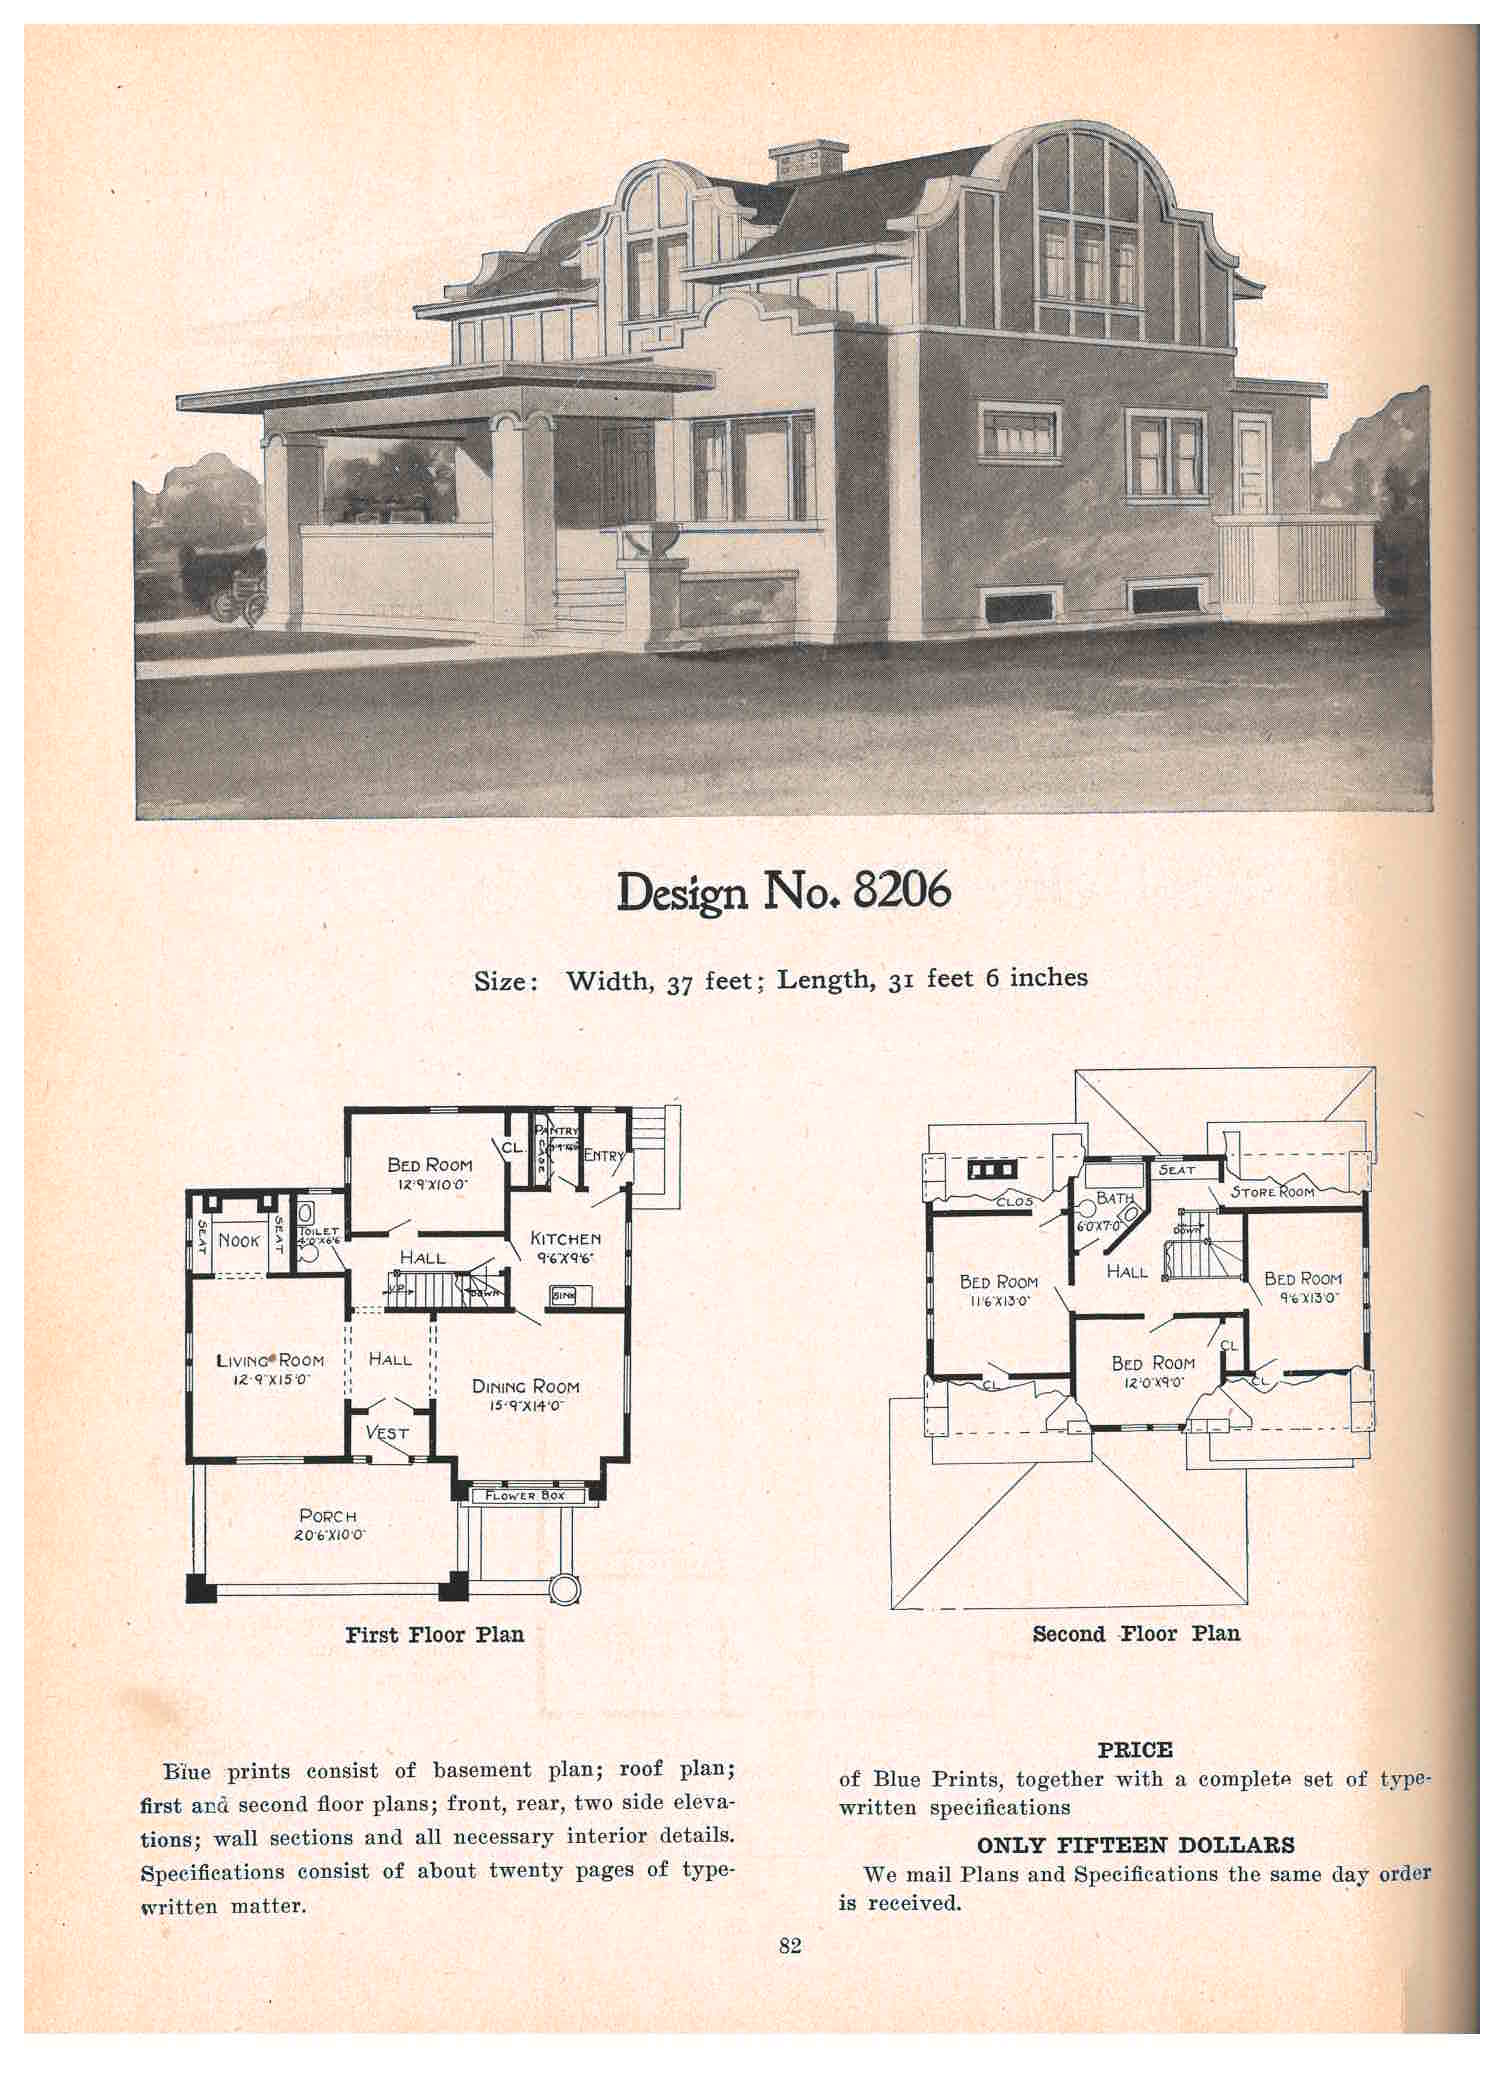 perspective view and floor plans of two floor house consisting of living room with nook, dining room, kitchen, bedroom, and bathroom on first floor and three bedrooms, store room, and bathroom on second floor